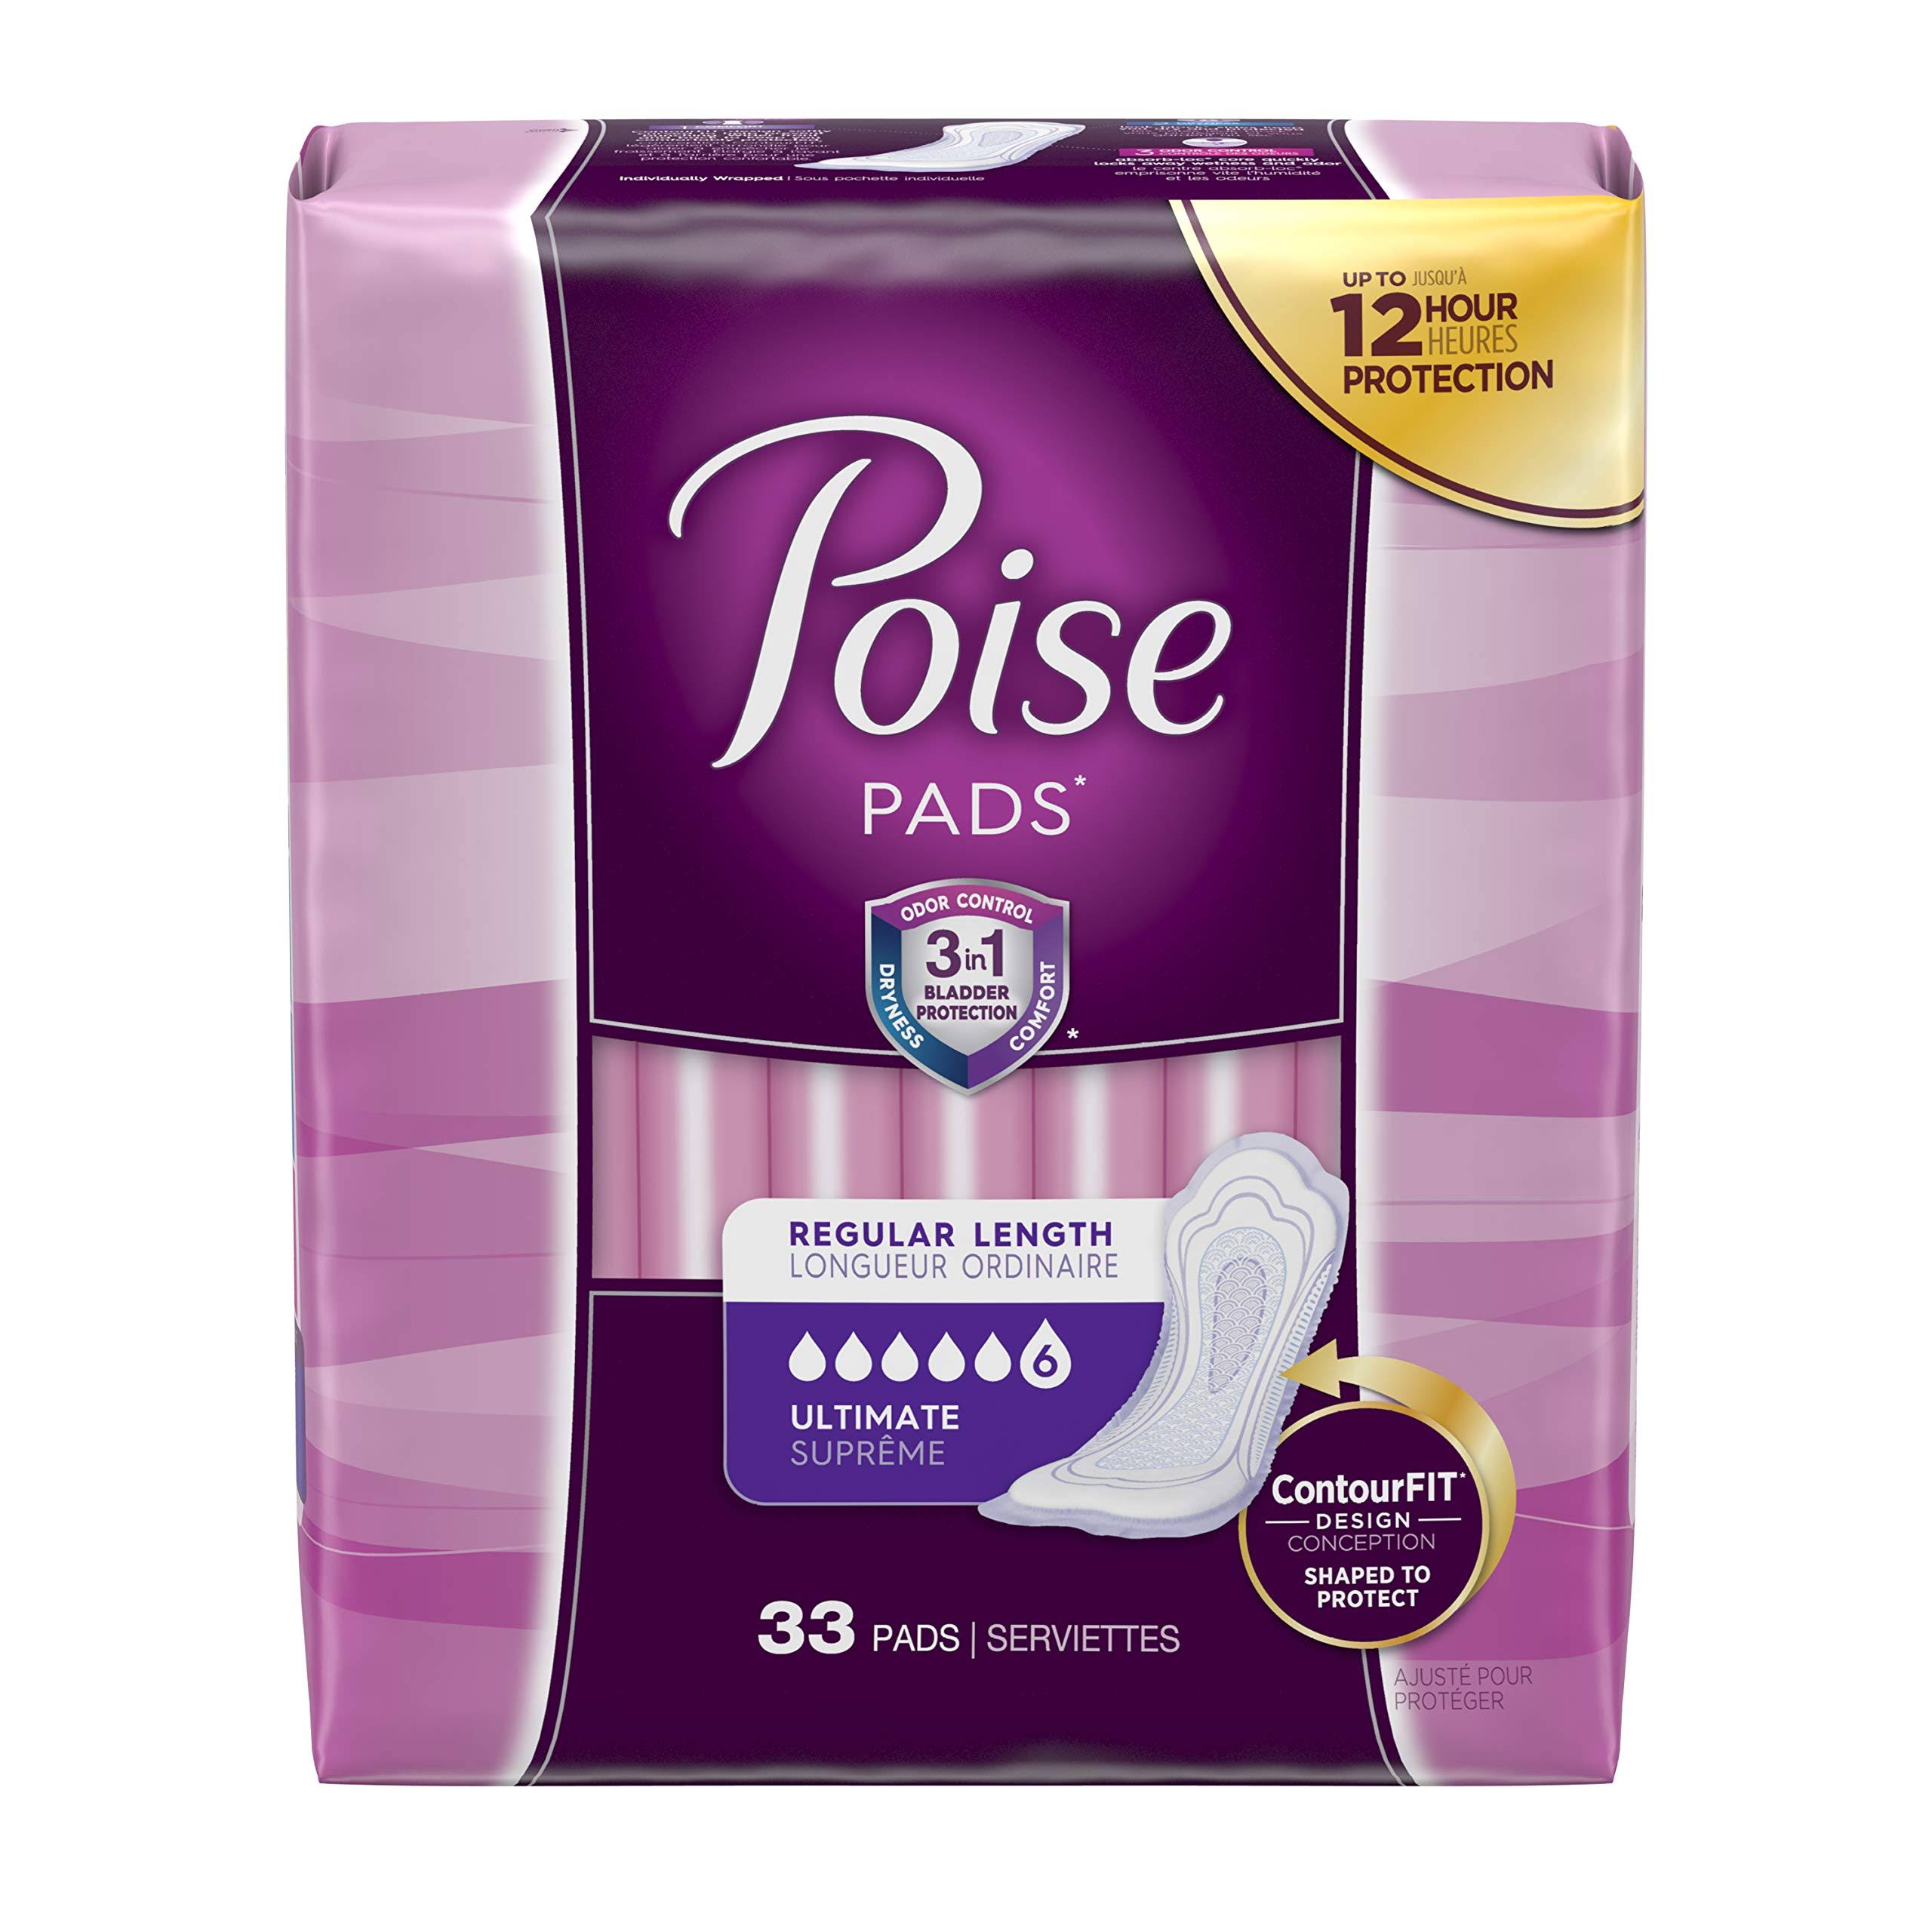 Poise Pads - 33 Pads